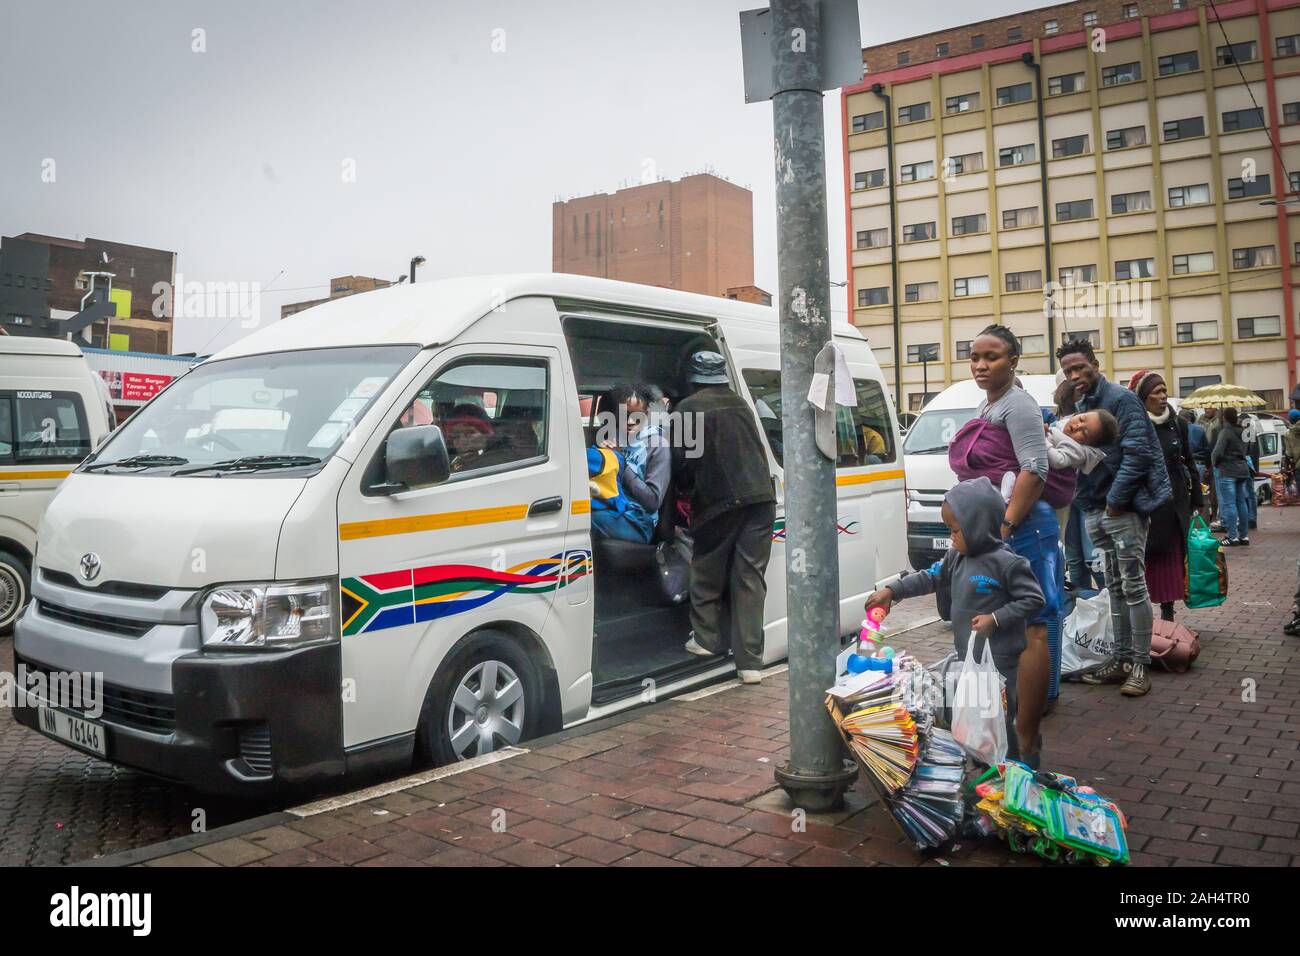 Johannesburg, South Africa - December 5, 2019 - bus station in the city centre; passenger wait for a taxi bus Stock Photo